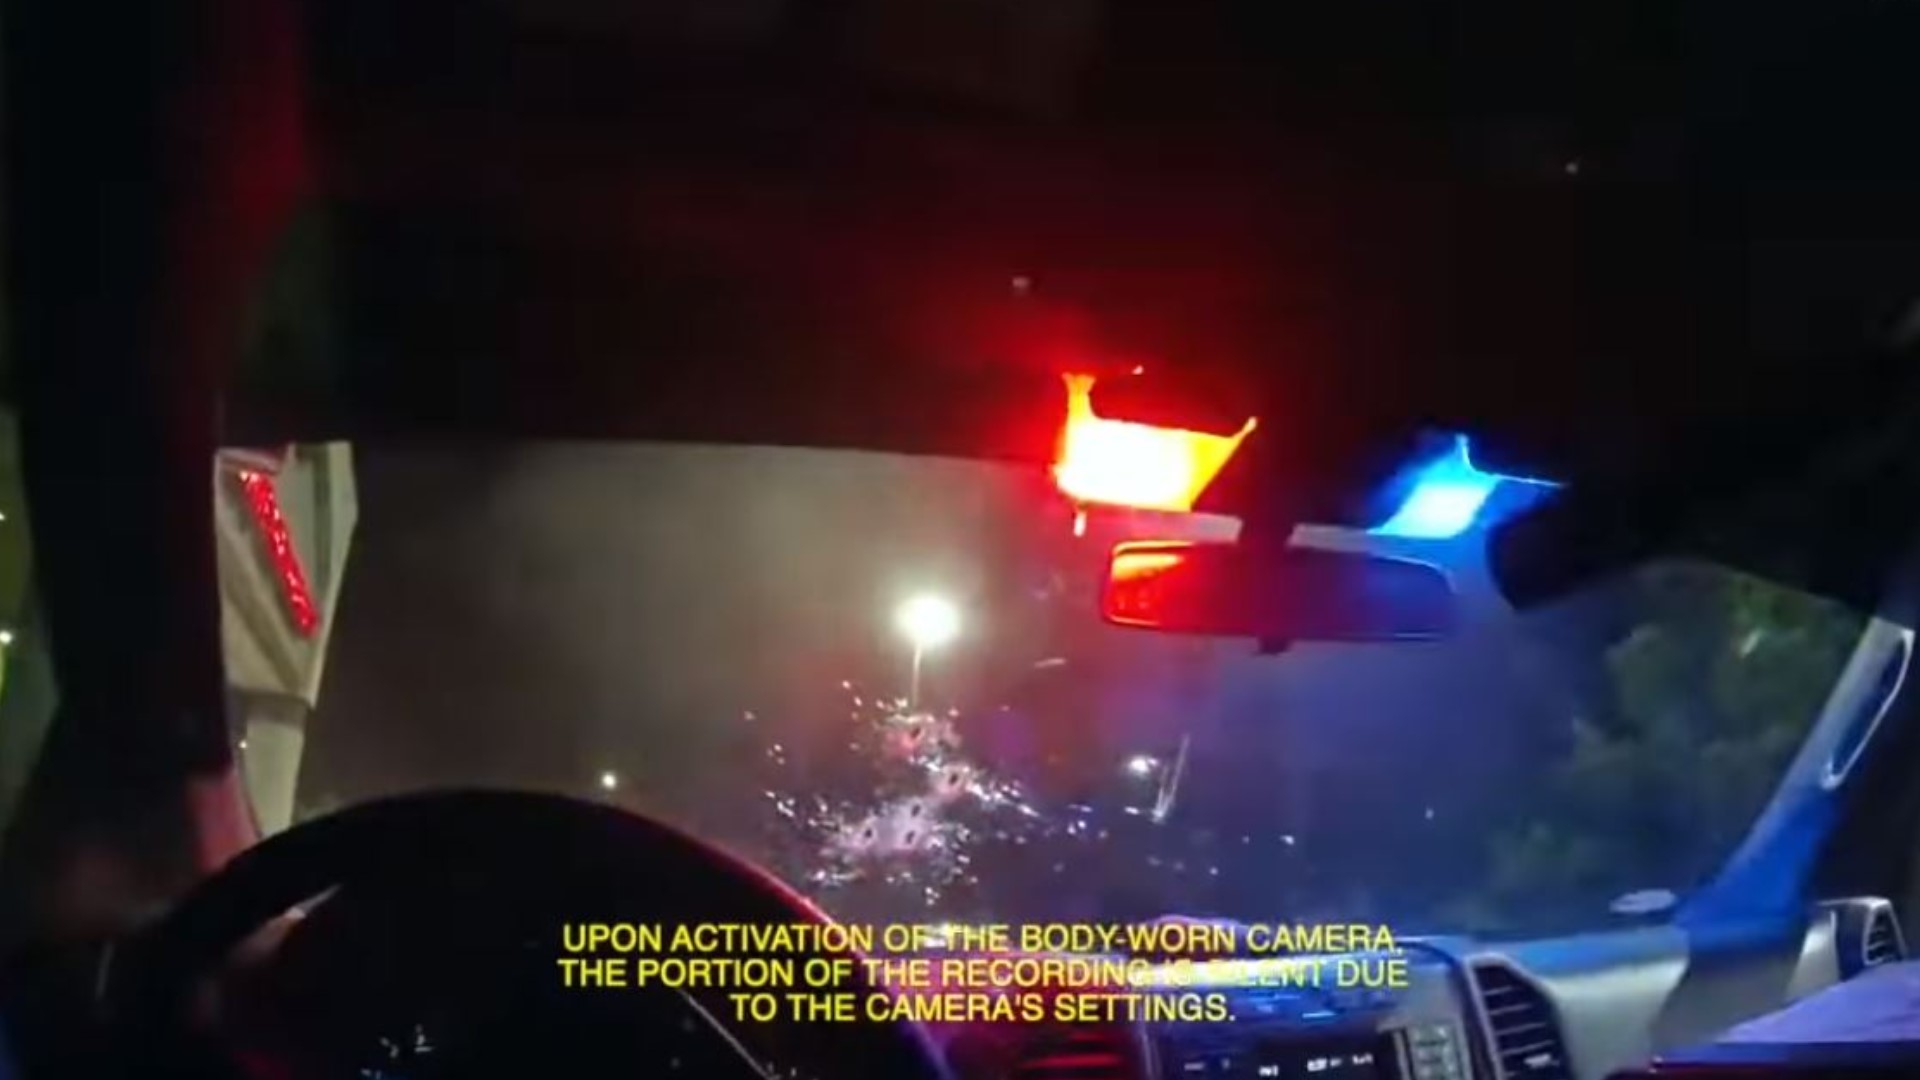 The announcement comes just days after police released bodycam footage of the police shooting, which showed an officer firing through a windshield from the backseat.